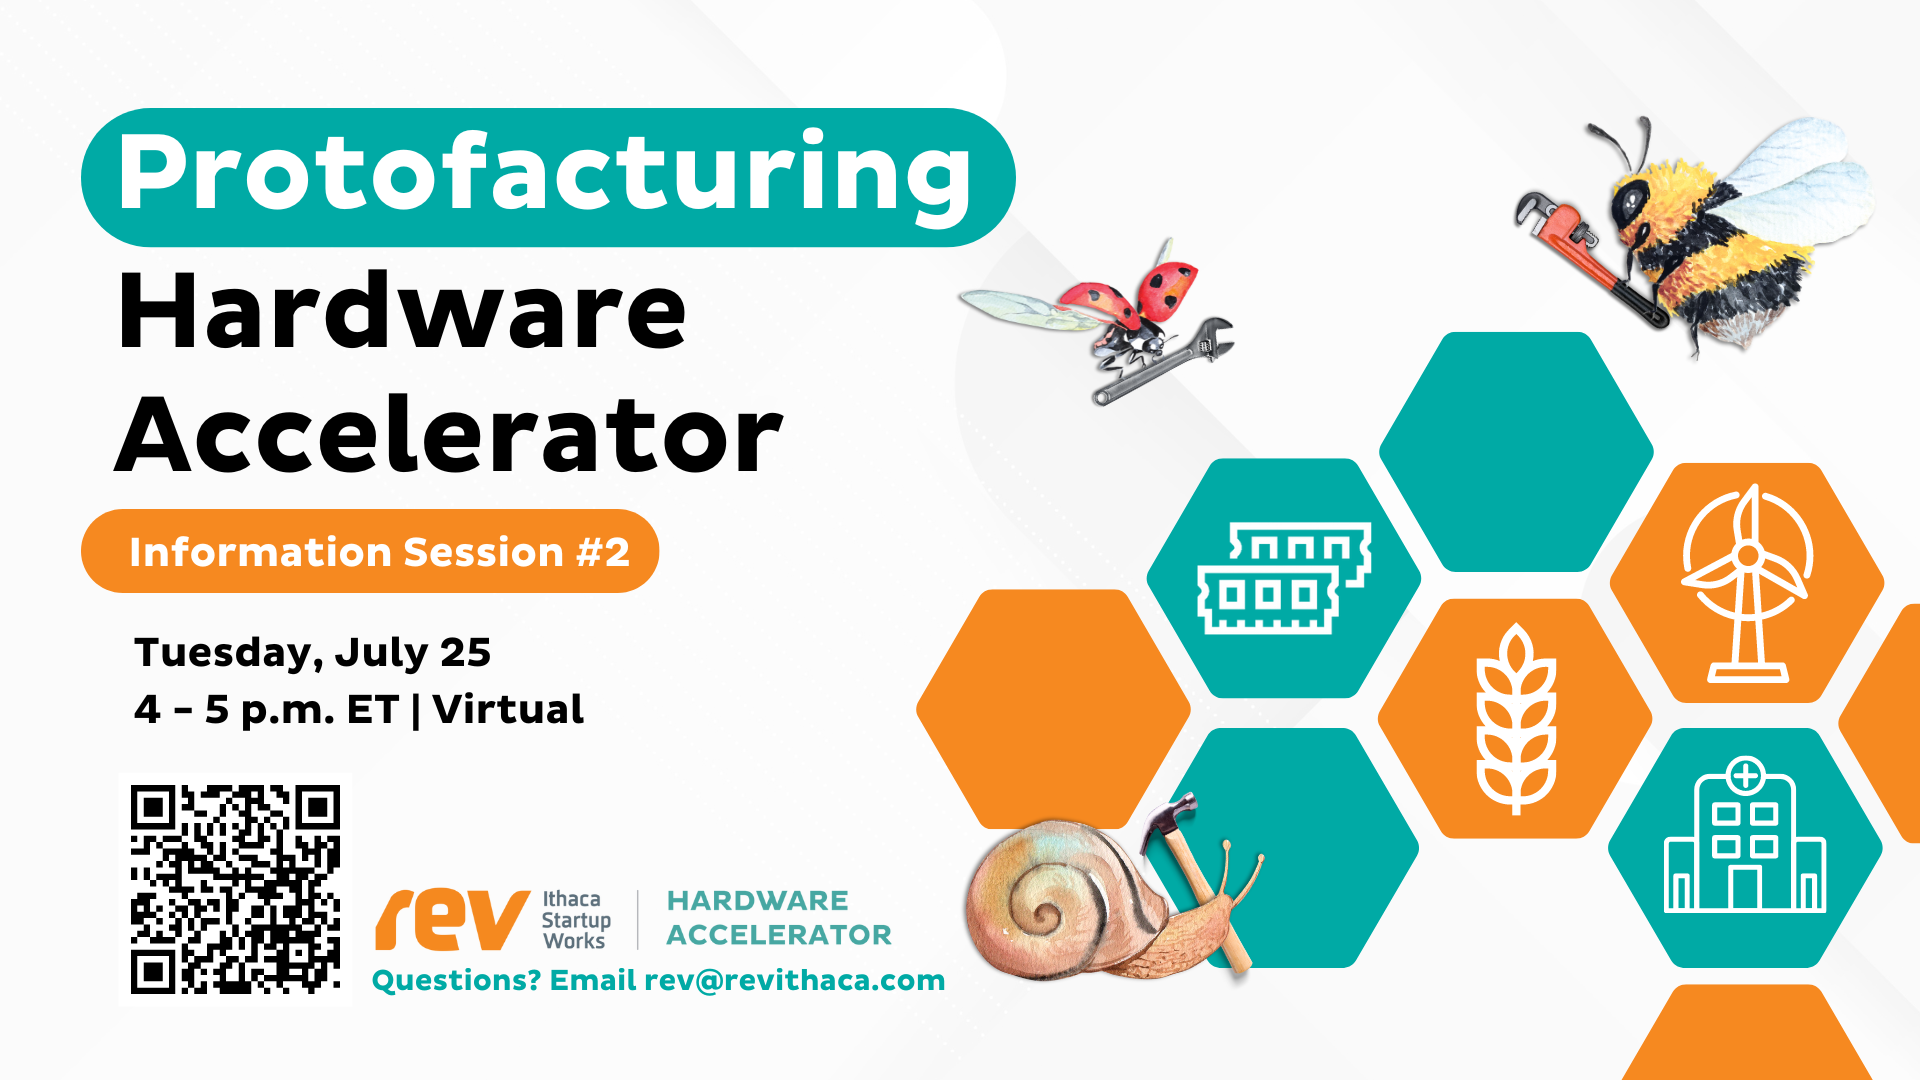 Protofacturing Hardware Accelerator Information Session One on July 25th.